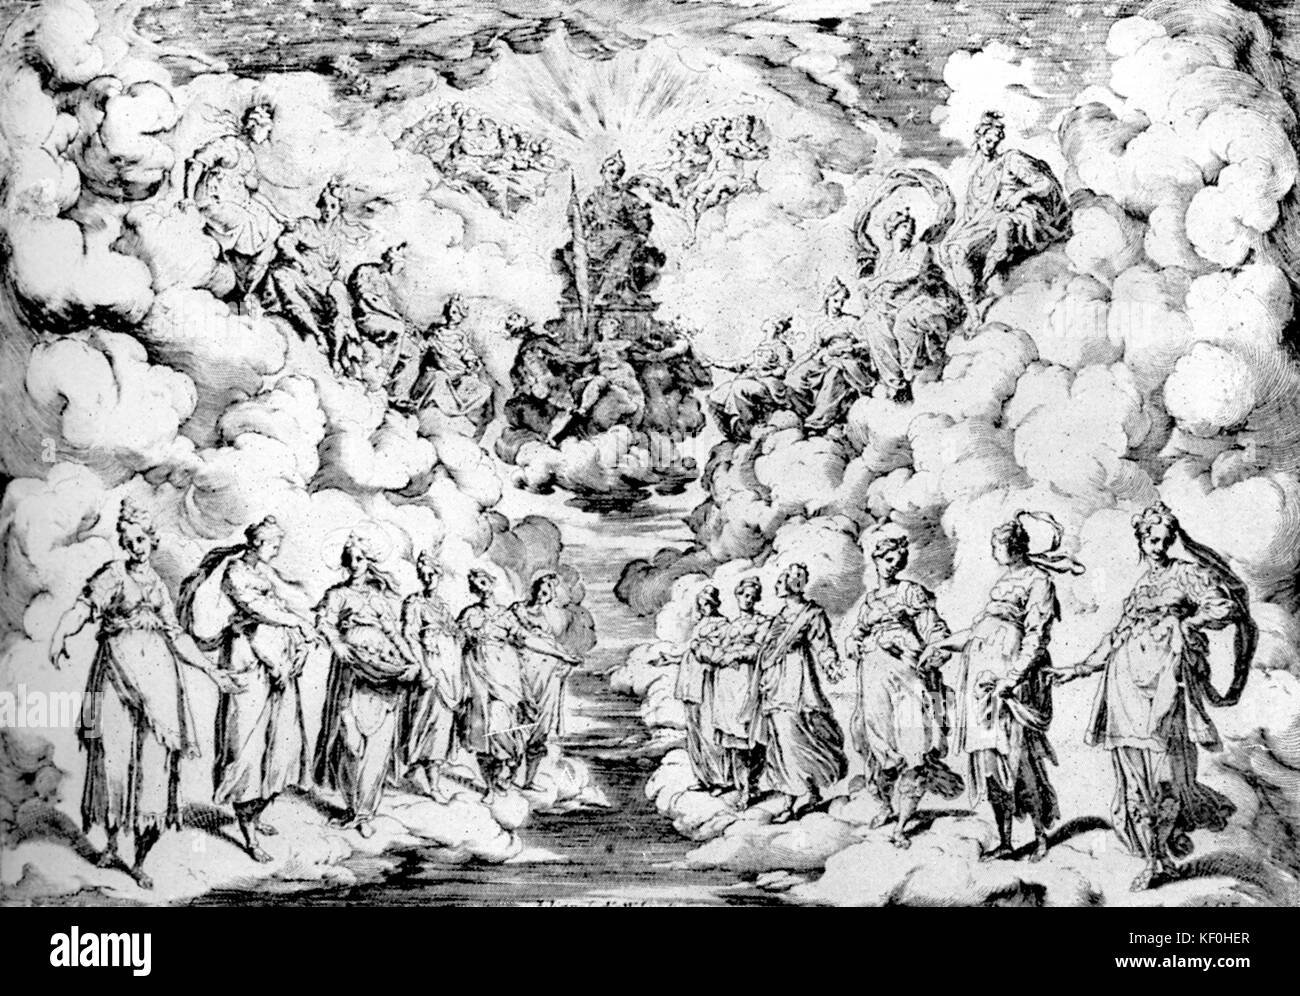 Florentine Intermedi of 1589 - L'armonia della stere. Setting designed by Bernardo Buontalenti for the first intermedio from the 1589 Medici wedding:    Harmony descends to earth (intermedi attempted to recreate what was believed to be the ancient world's integration of music, drama and staging). Stock Photo